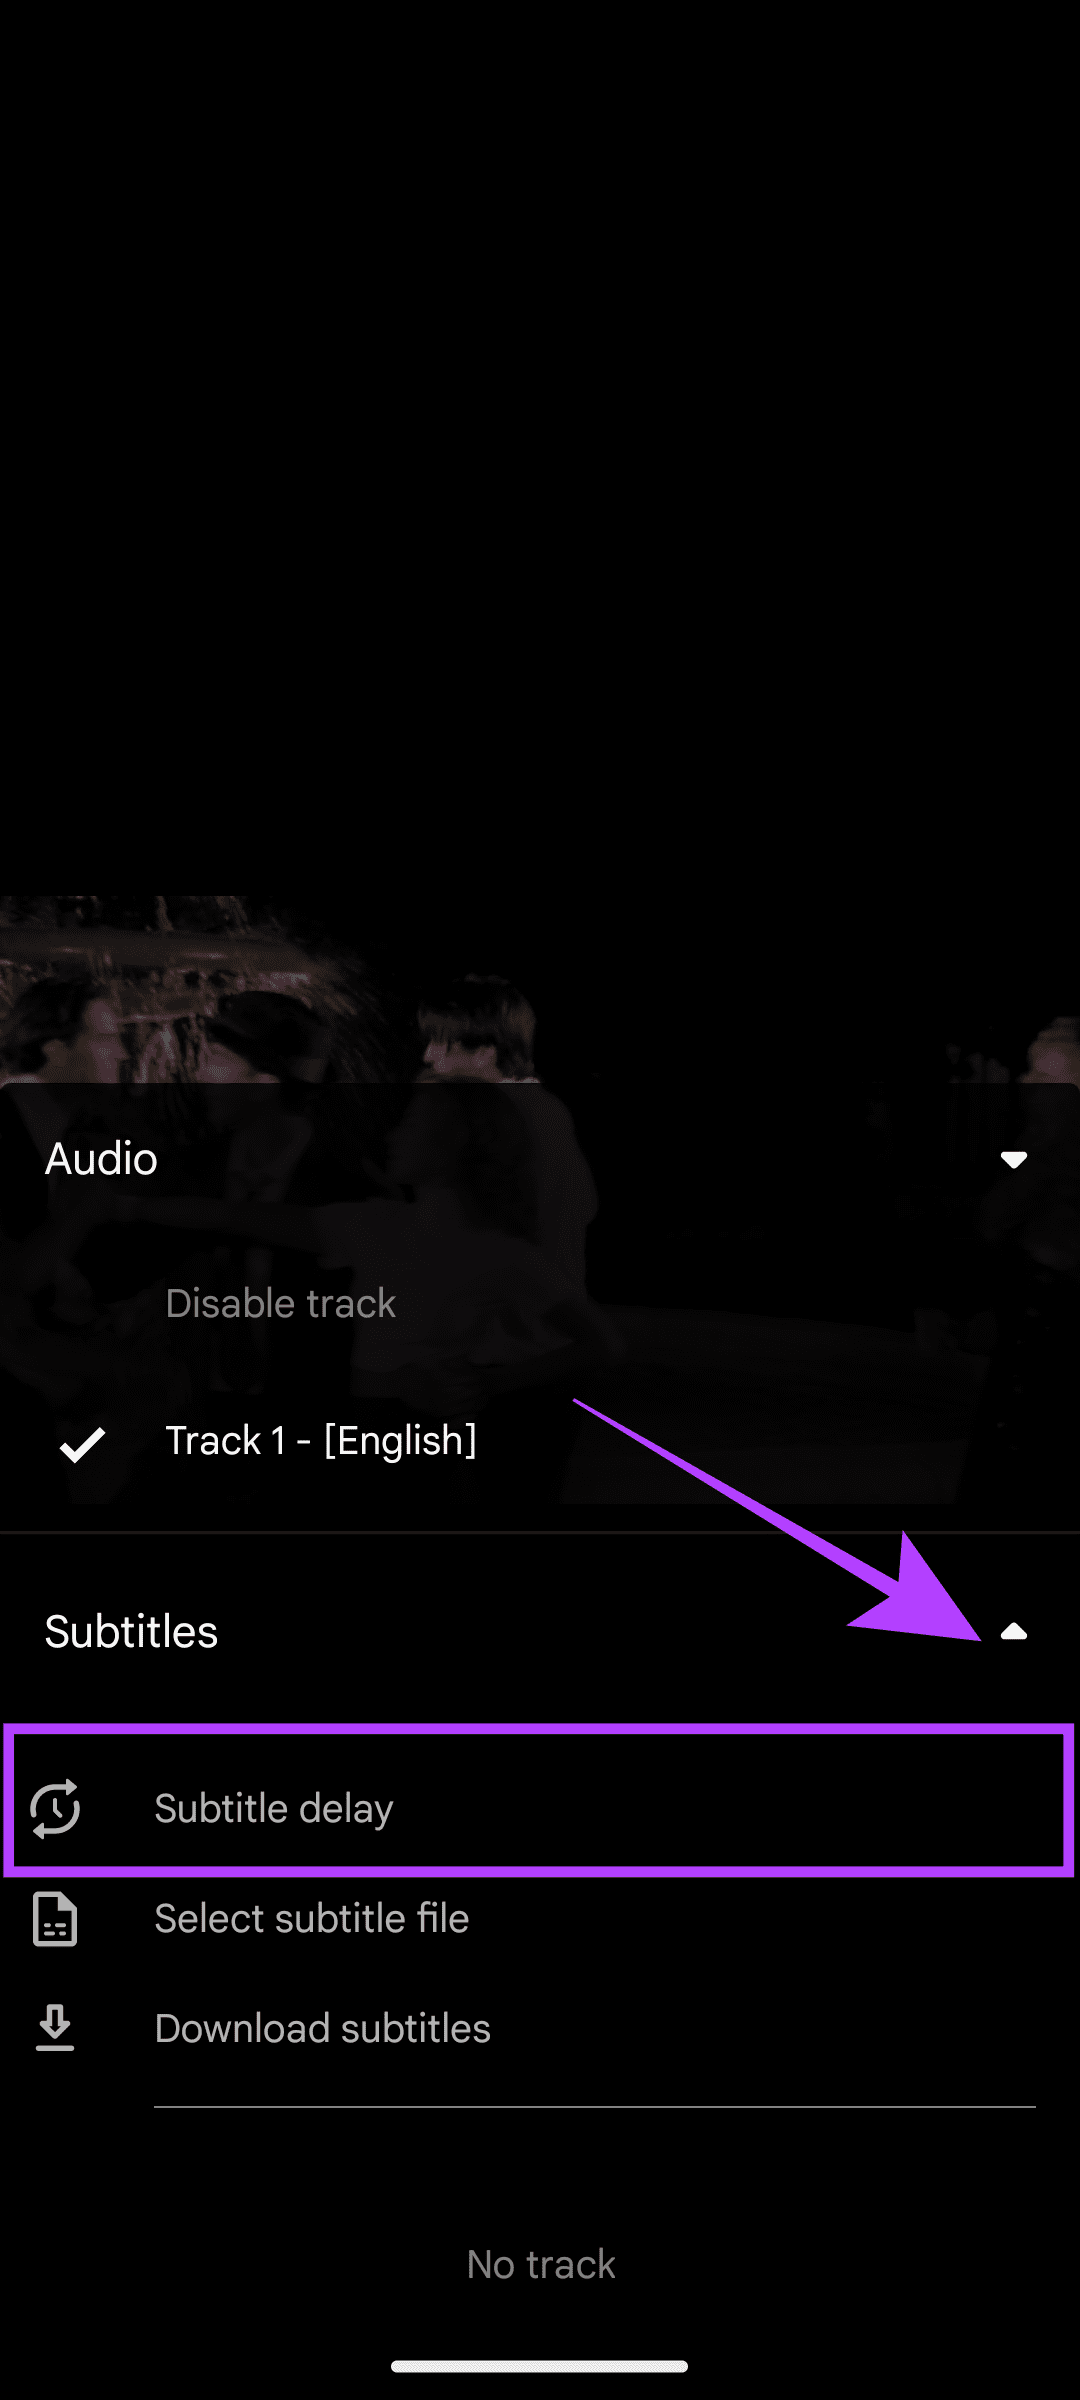 choose the down arrow and then tap subtitle delay